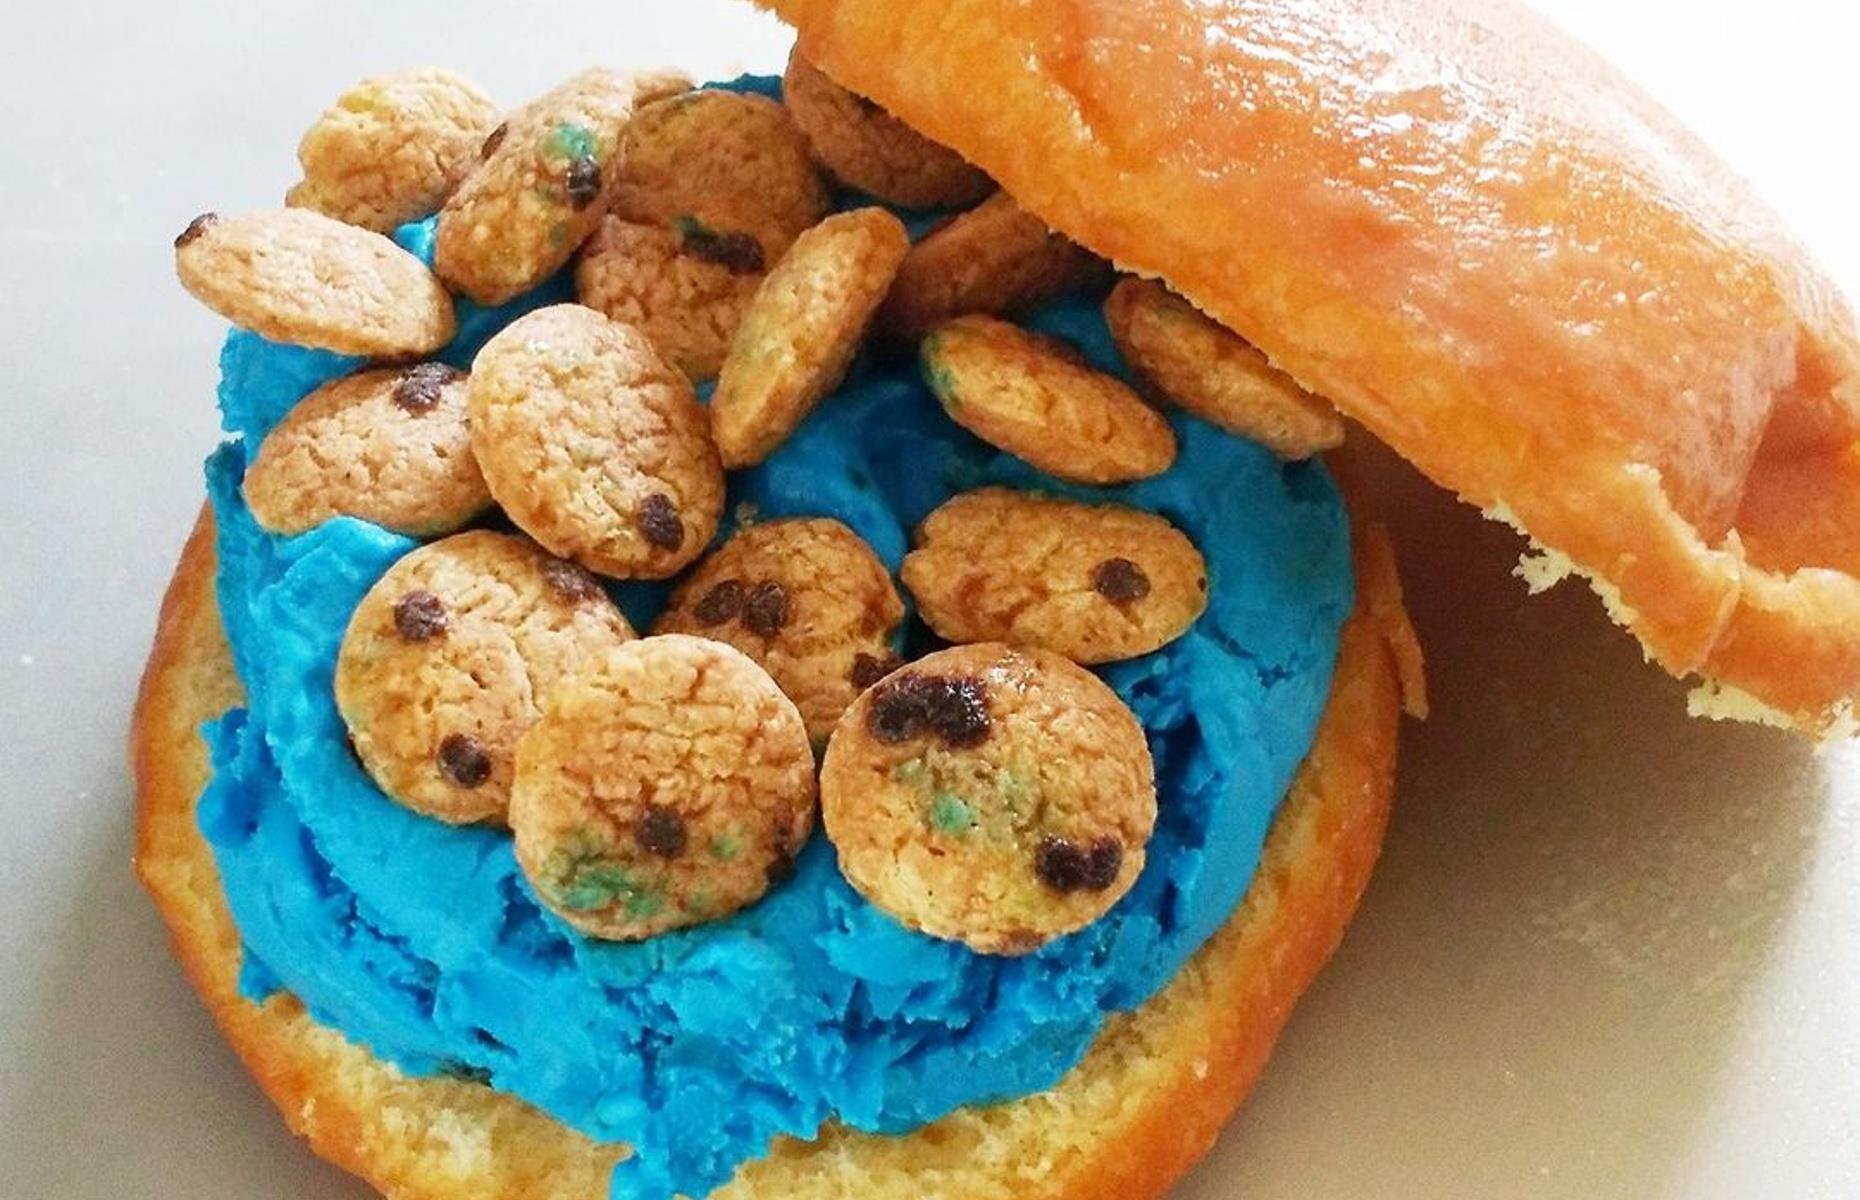 <p><a href="https://www.facebook.com/NovelPHX/">Novel Ice Cream</a> does offer its variety of ice cream flavors in a cup or waffle sandwich, but it’s the warm donut buns, with a scoop stuffed inside, that it's best known for. The bright blue Cookie Monster ice cream donut or ‘doughmelt’, with mini cookies and crushed Oreos, is a real standout in both taste and appearance.</p>